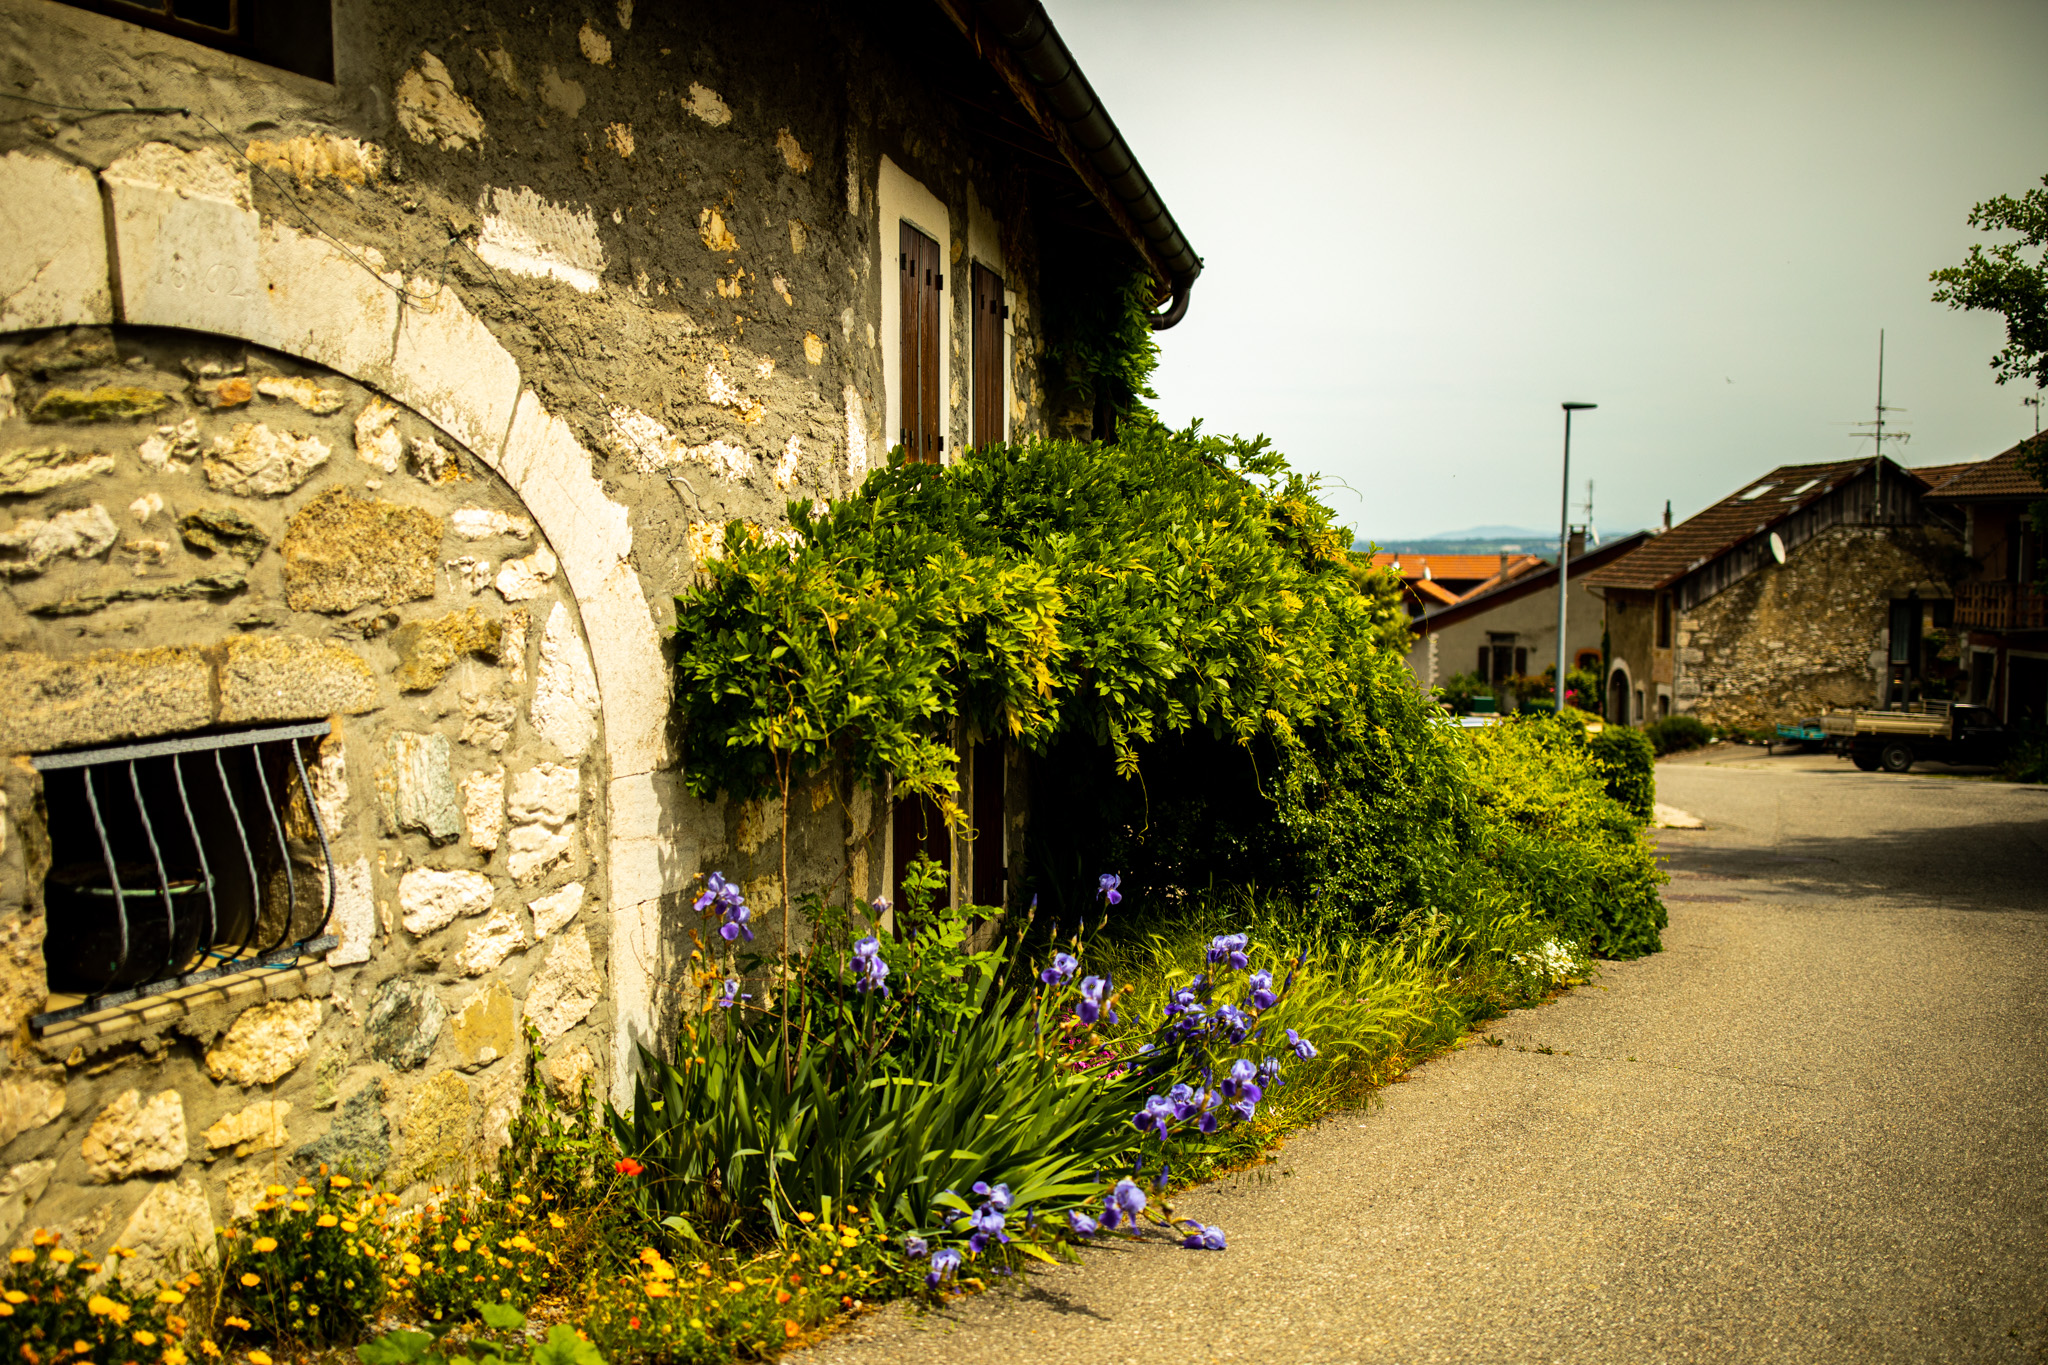 General 2048x1365 outdoors photography building house village flowers greenery nature stones road